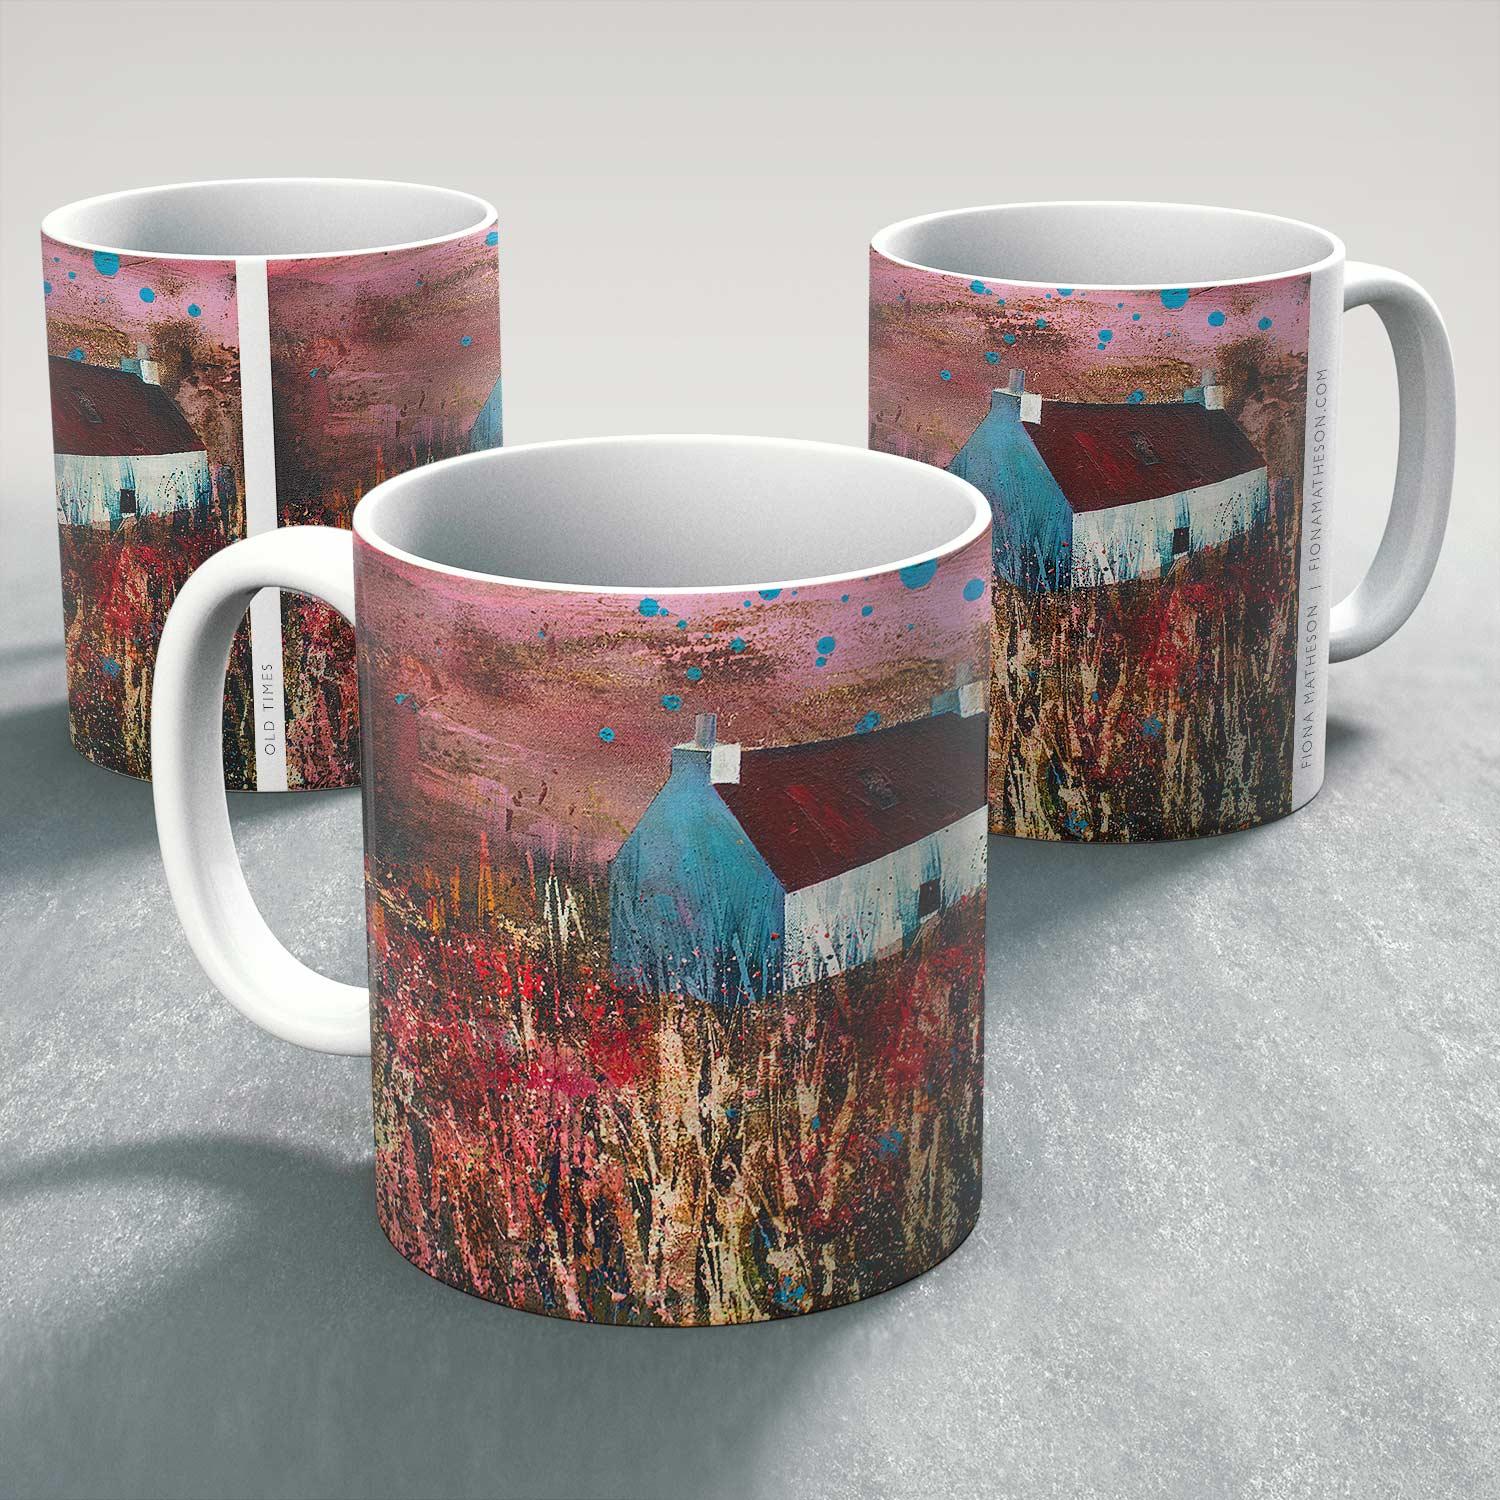 Old Times Mug from an original painting by artist Fiona Matheson